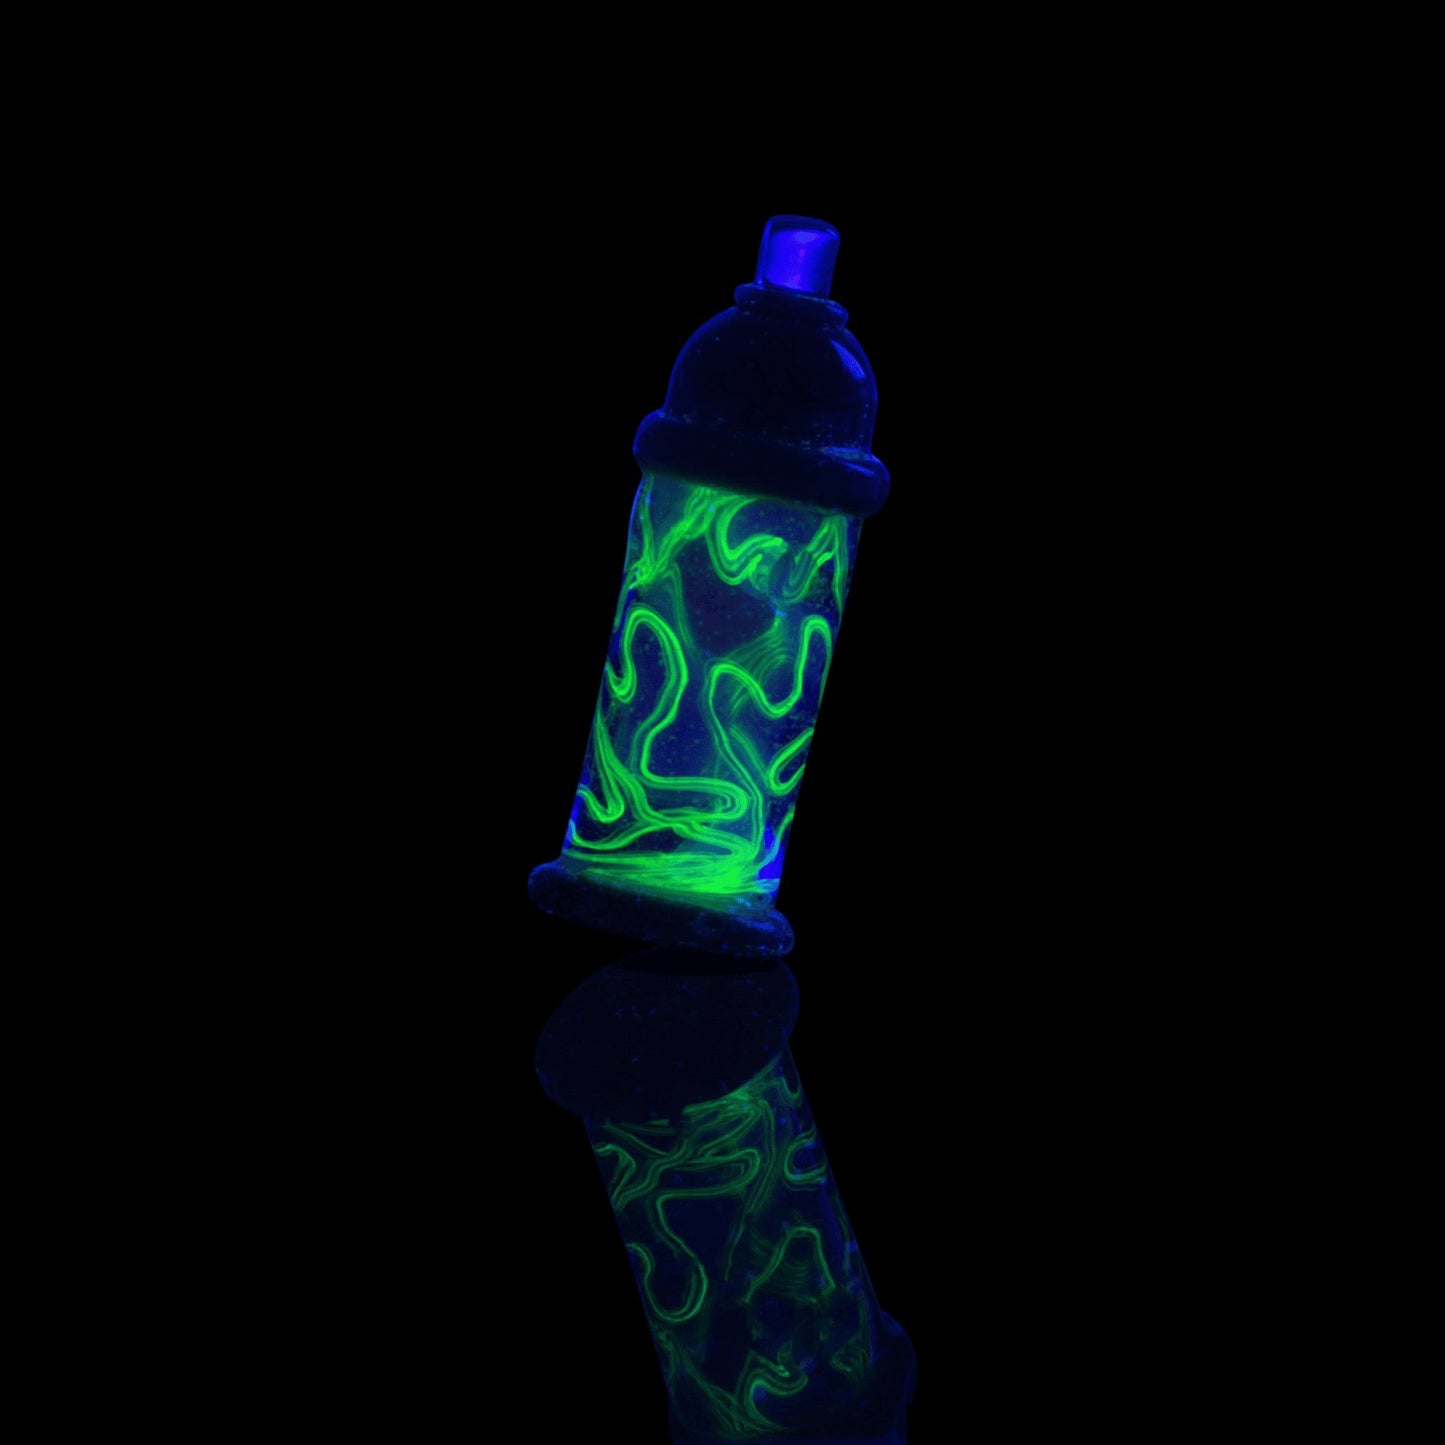 meticulously crafted glass pendant - Collab Spray Can Pendant by Rone x Scomo Moanet (Scribble Season 2022)